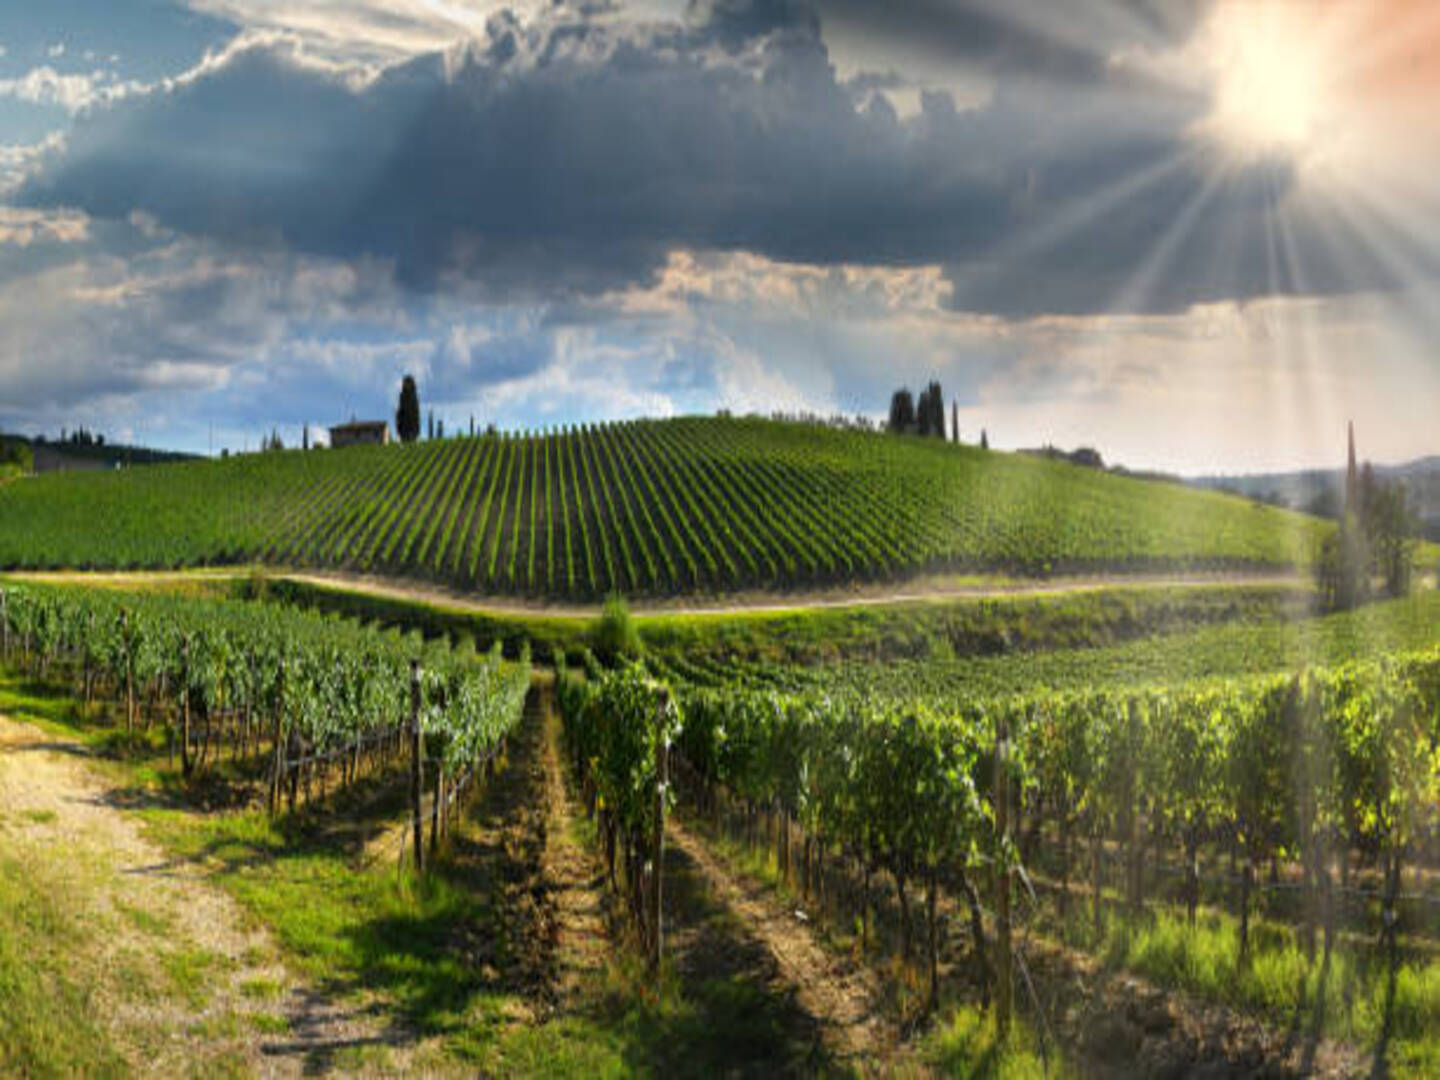 Green vineyards in tuscan countryside at sunset with cloudy sky in Italy.